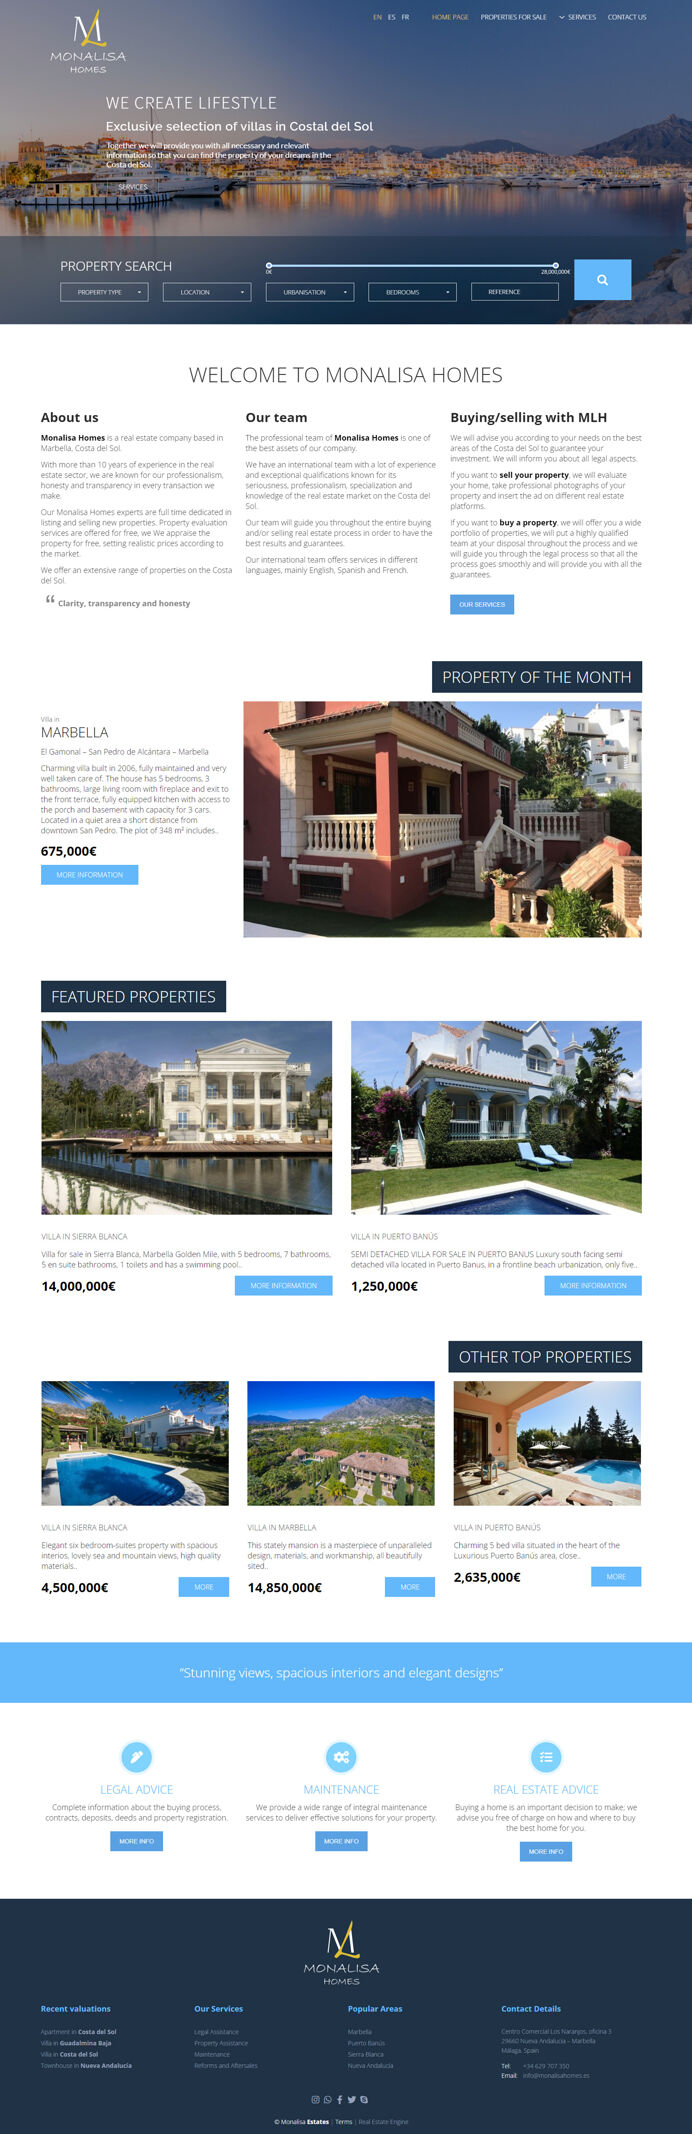 Exclusive website designed and developed for Monalisa real estate agency in Marbella